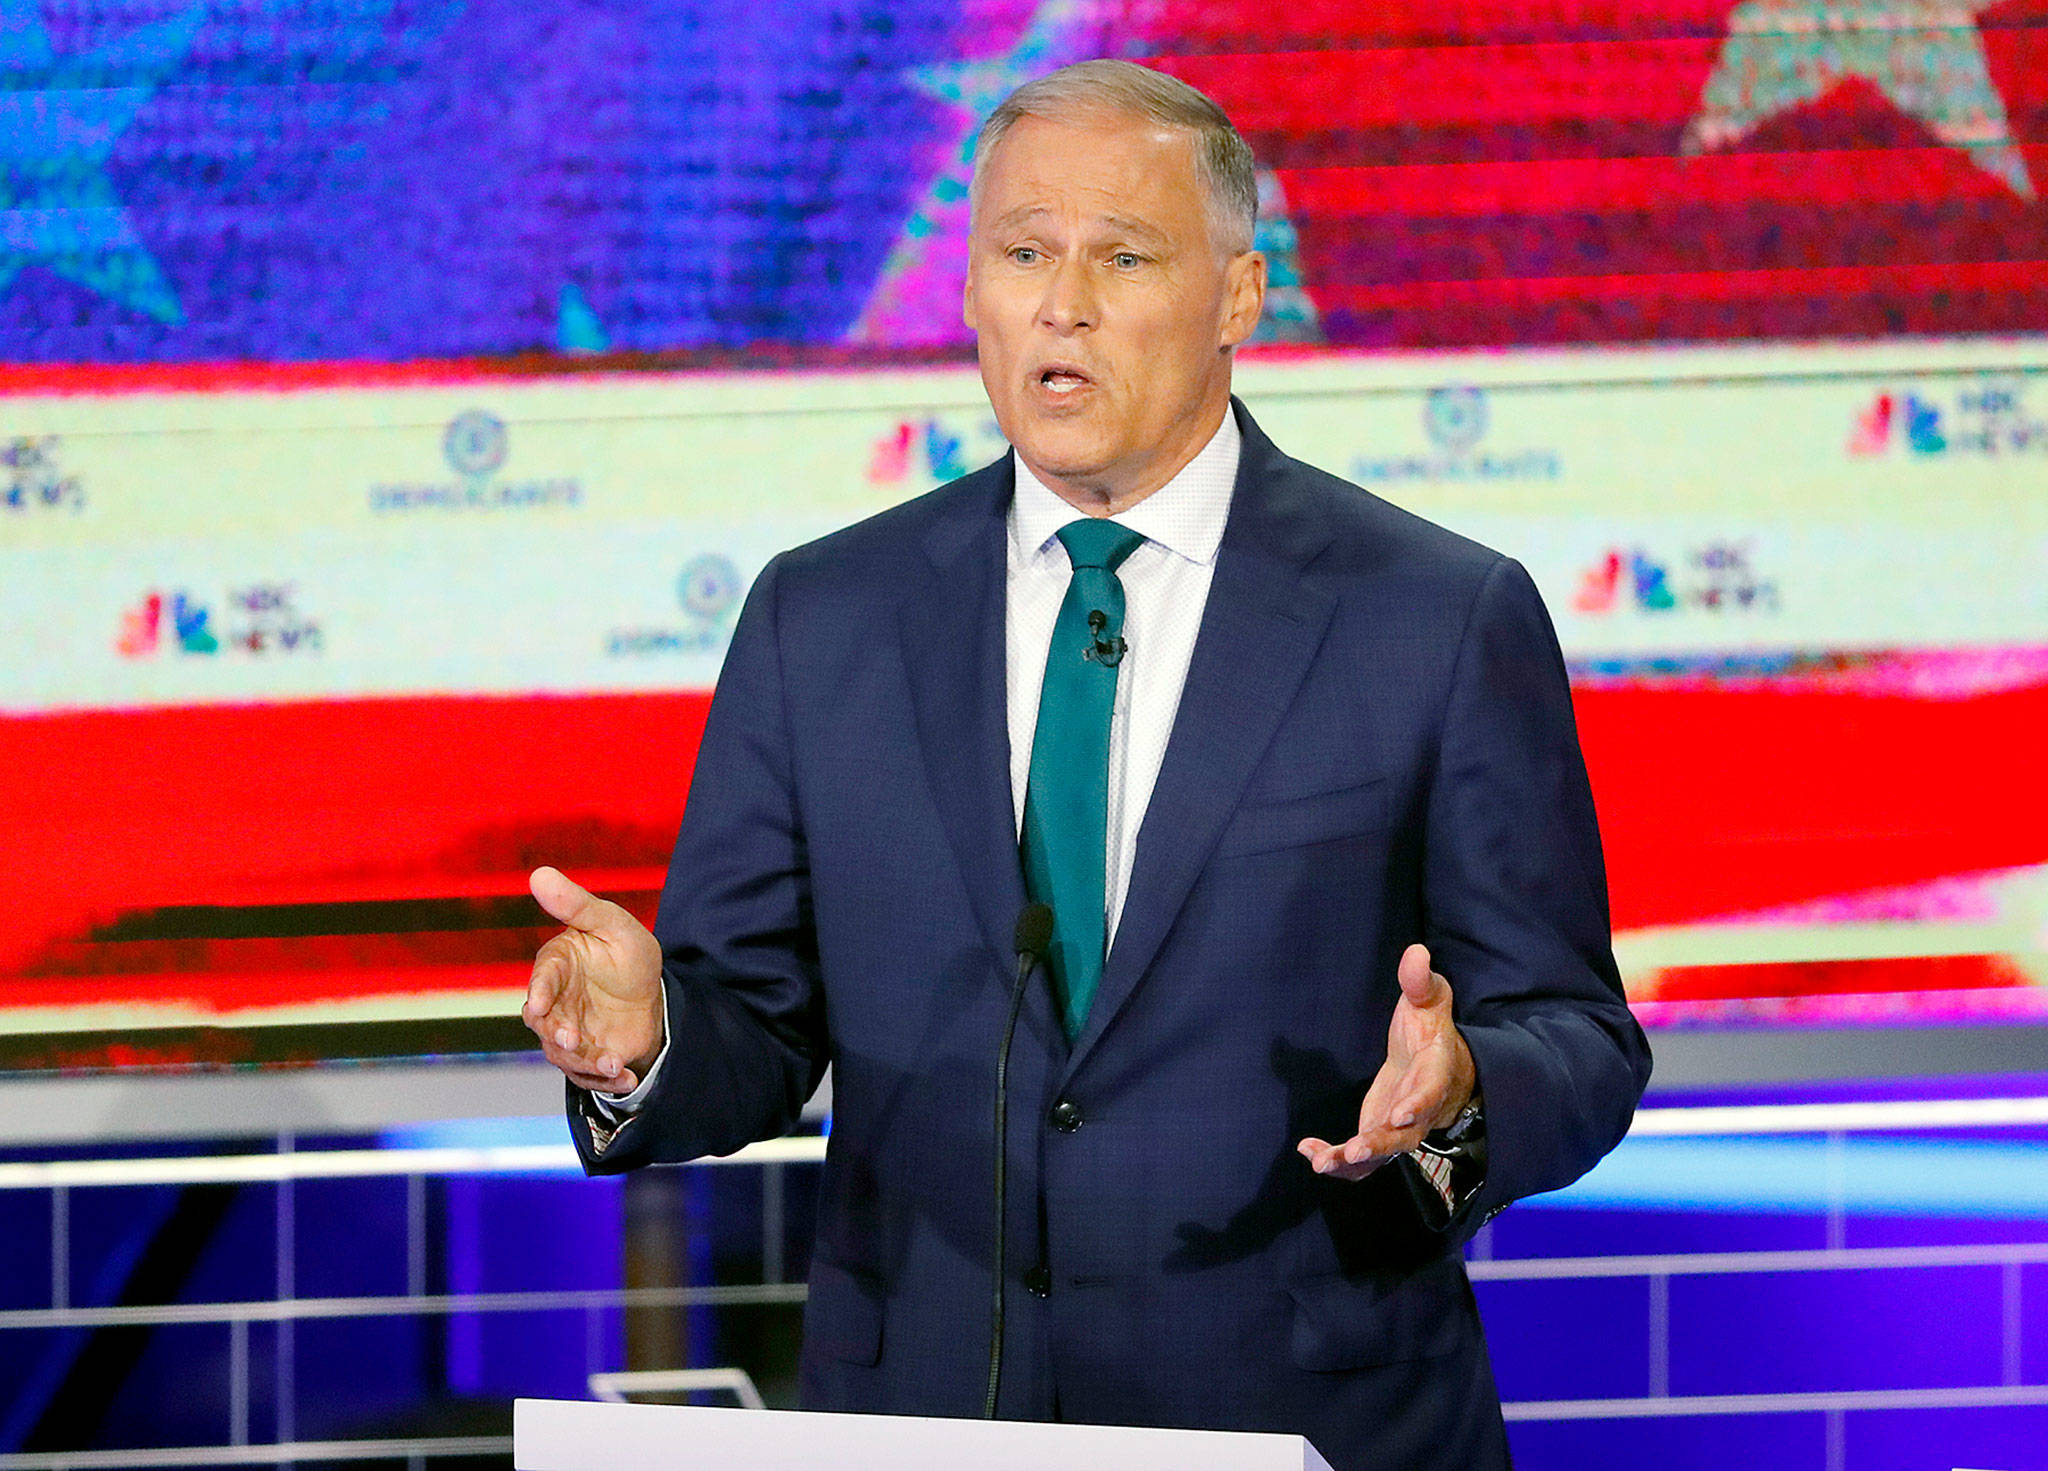 Democratic presidential candidate and Washington Gov. Jay Inslee speaks during a primary debate hosted by NBC News in Miami on Wednesday. (AP Photo/Wilfredo Lee)